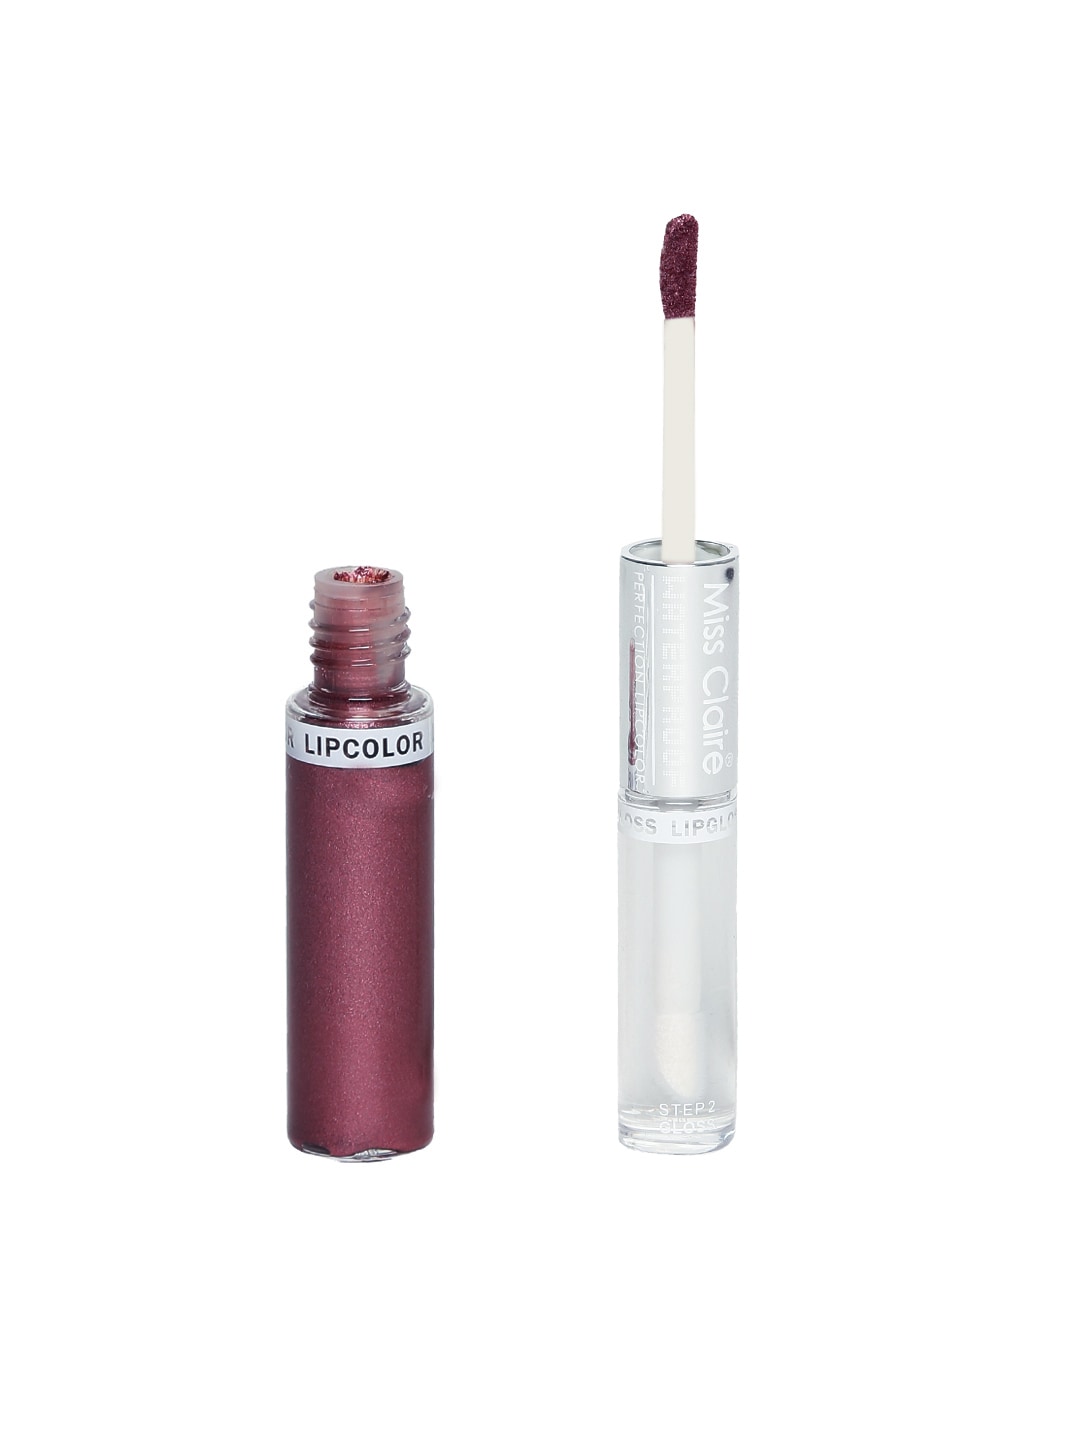 Miss Claire 29 Waterproof Perfection Lip Color & Lip Gloss 10 ml Price in India